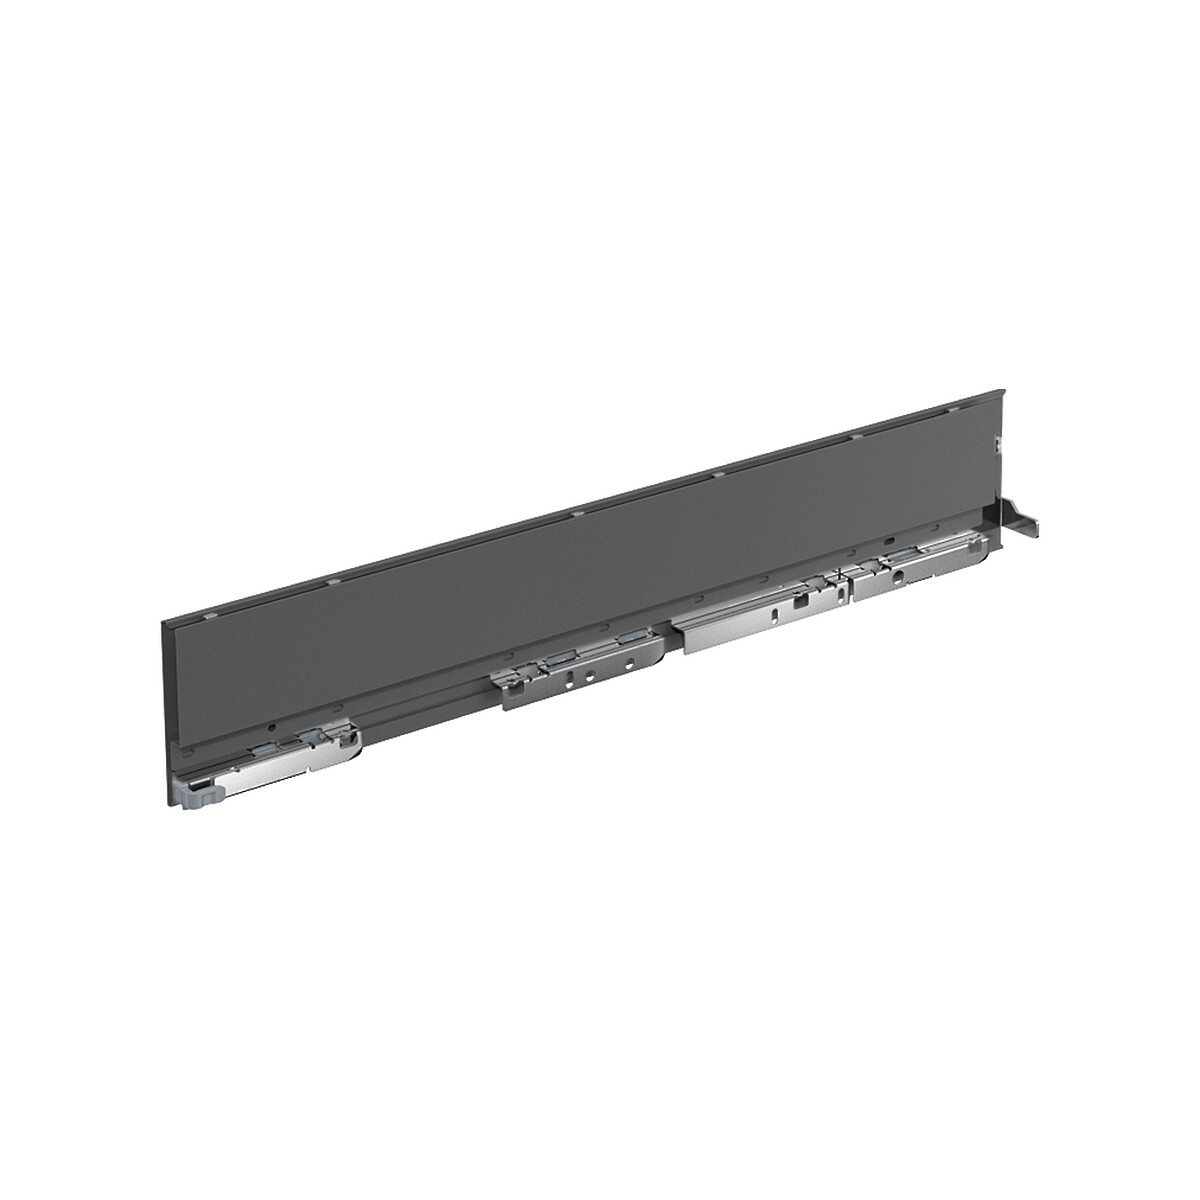 AvanTech YOU Drawer side profile, height 101 mm x NL 350 mm, Anthracite, Right